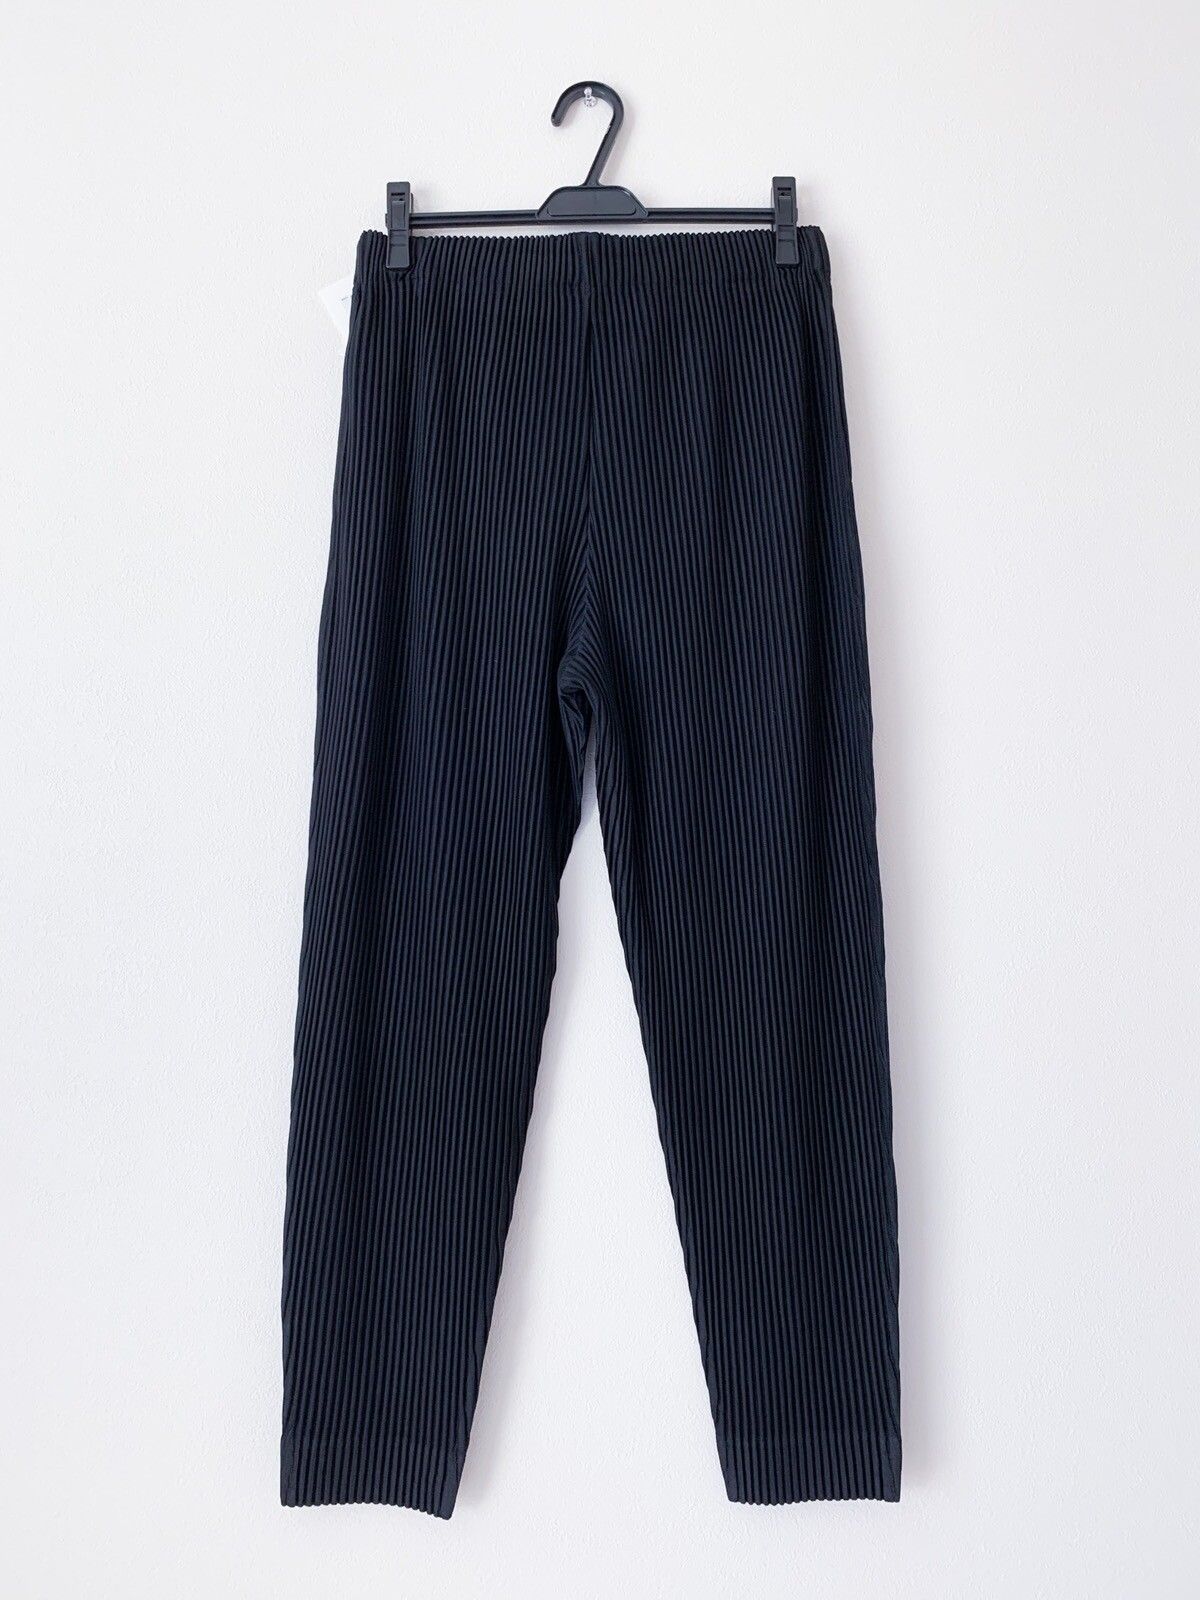 Issey Miyake Tapered Pleats -Size 3 Black JF103 | Grailed